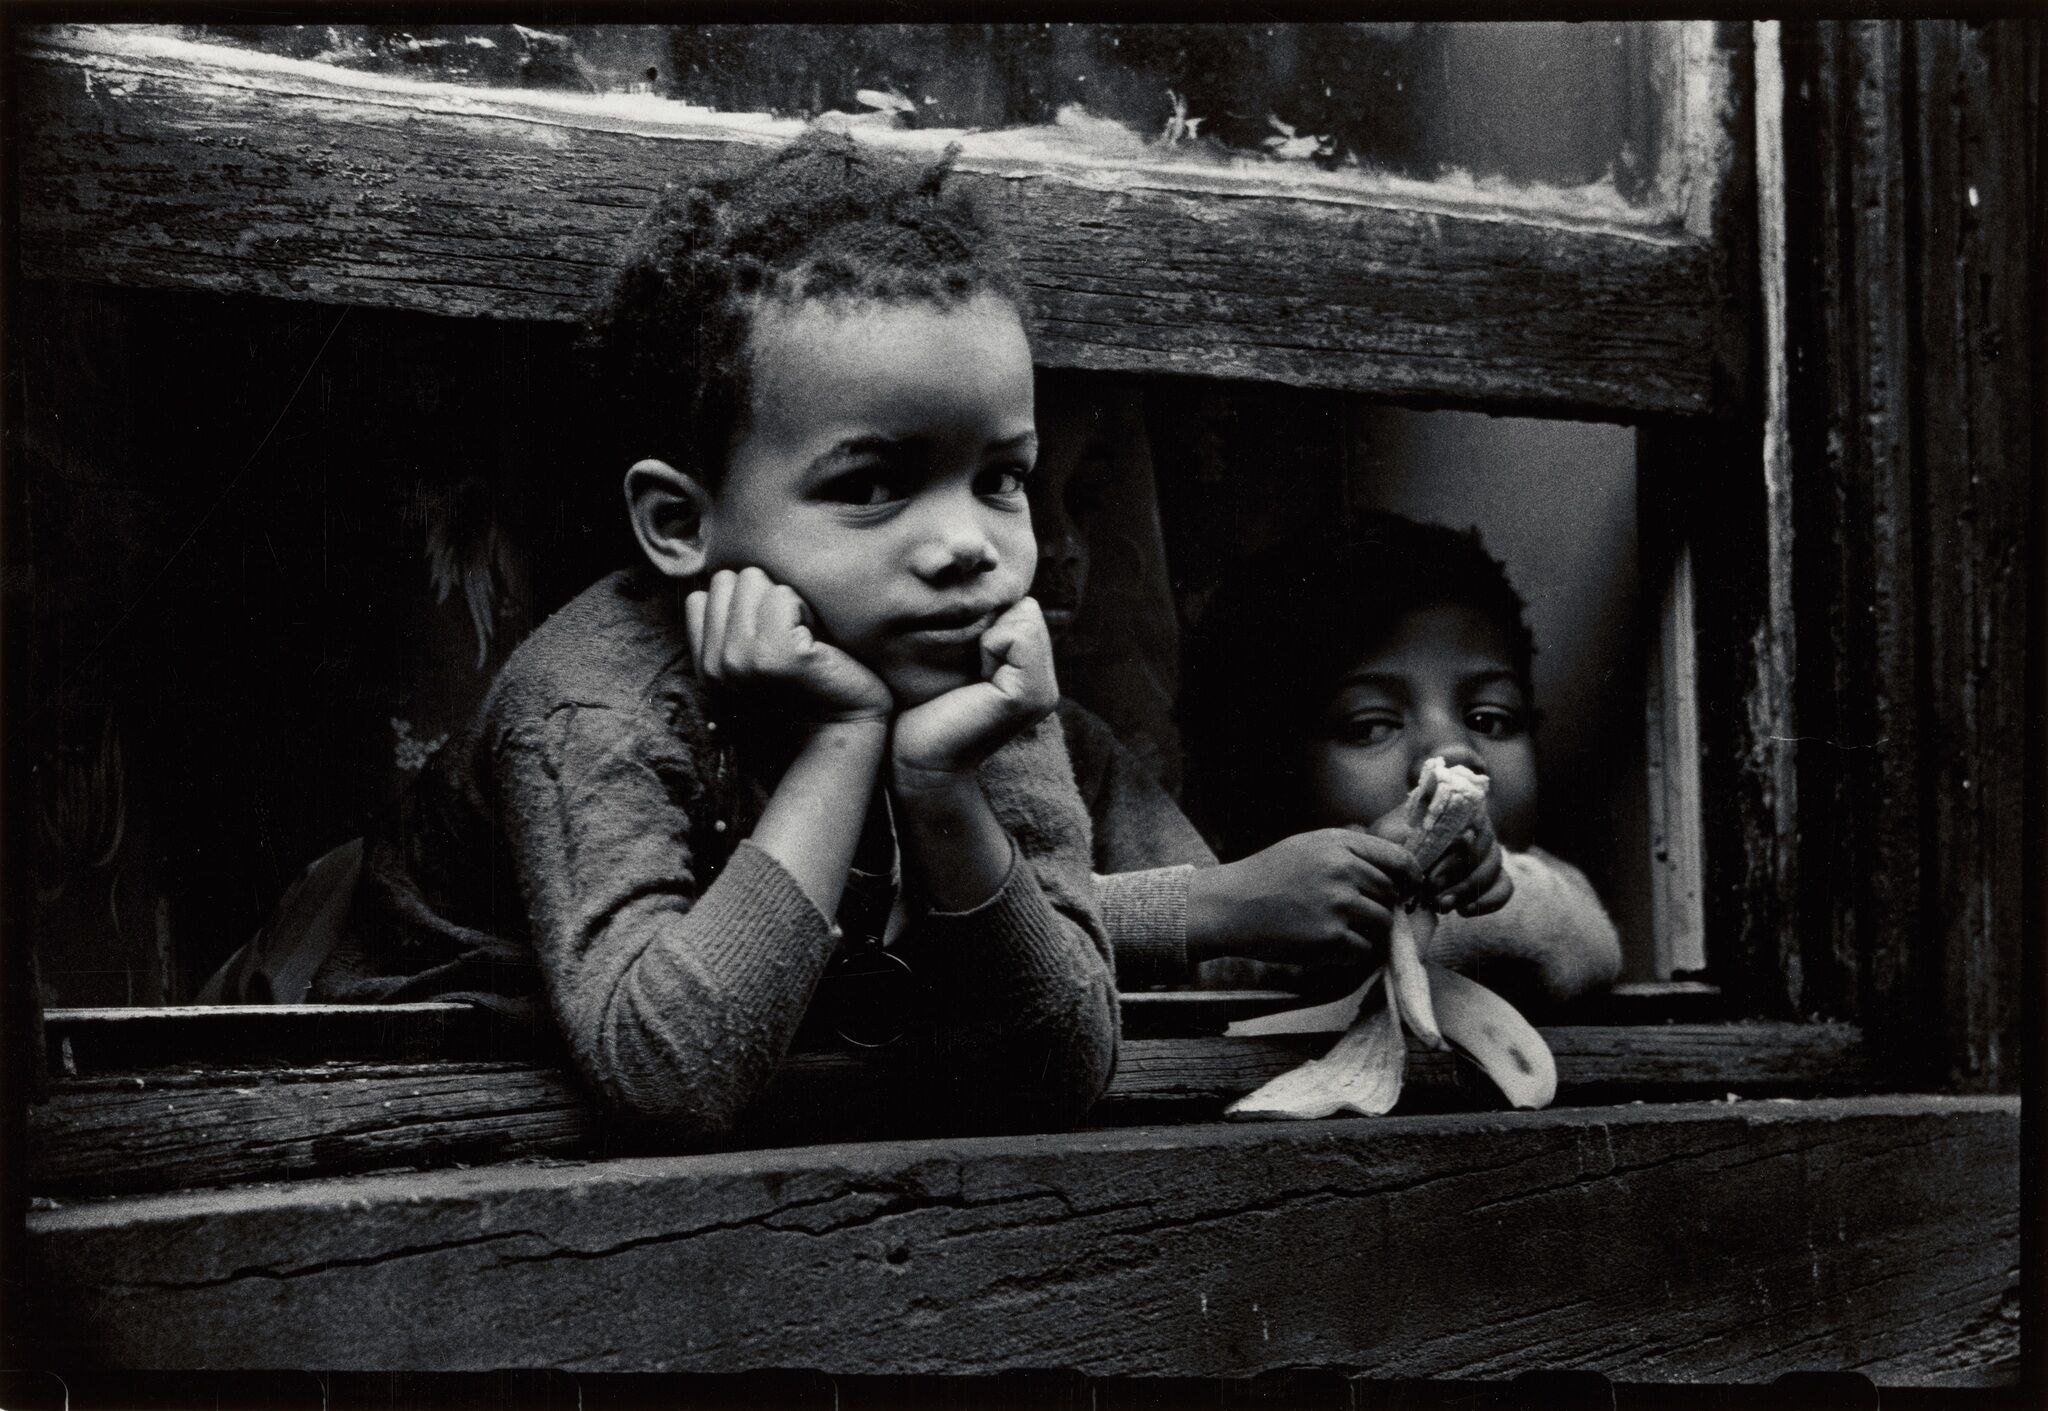 Two boys peeking out from a window.